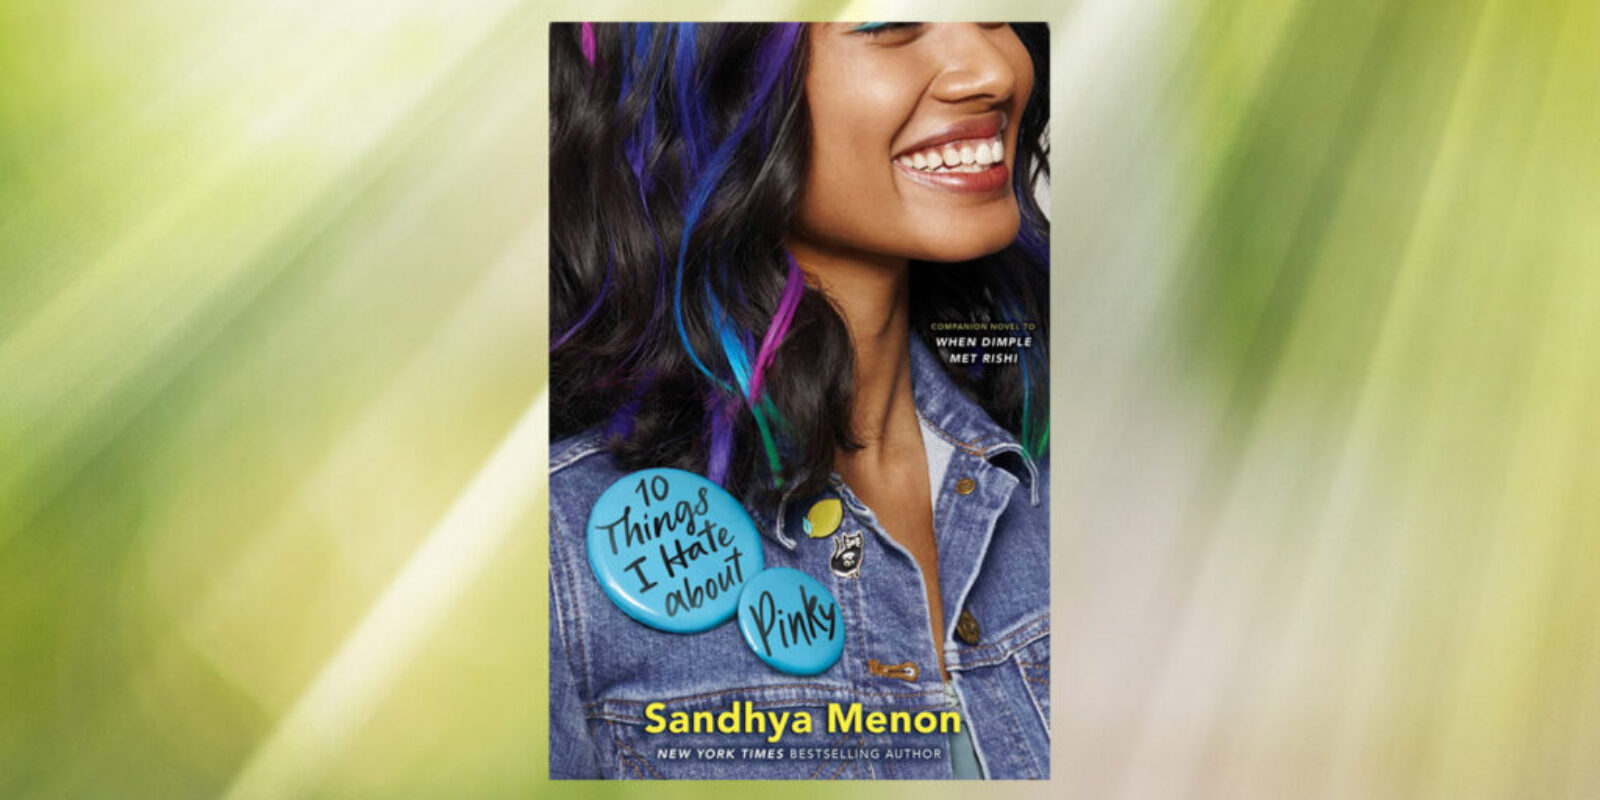 10-Things-I-Hate-About-Pinky-by-Sandhya-Menon-Book-Header